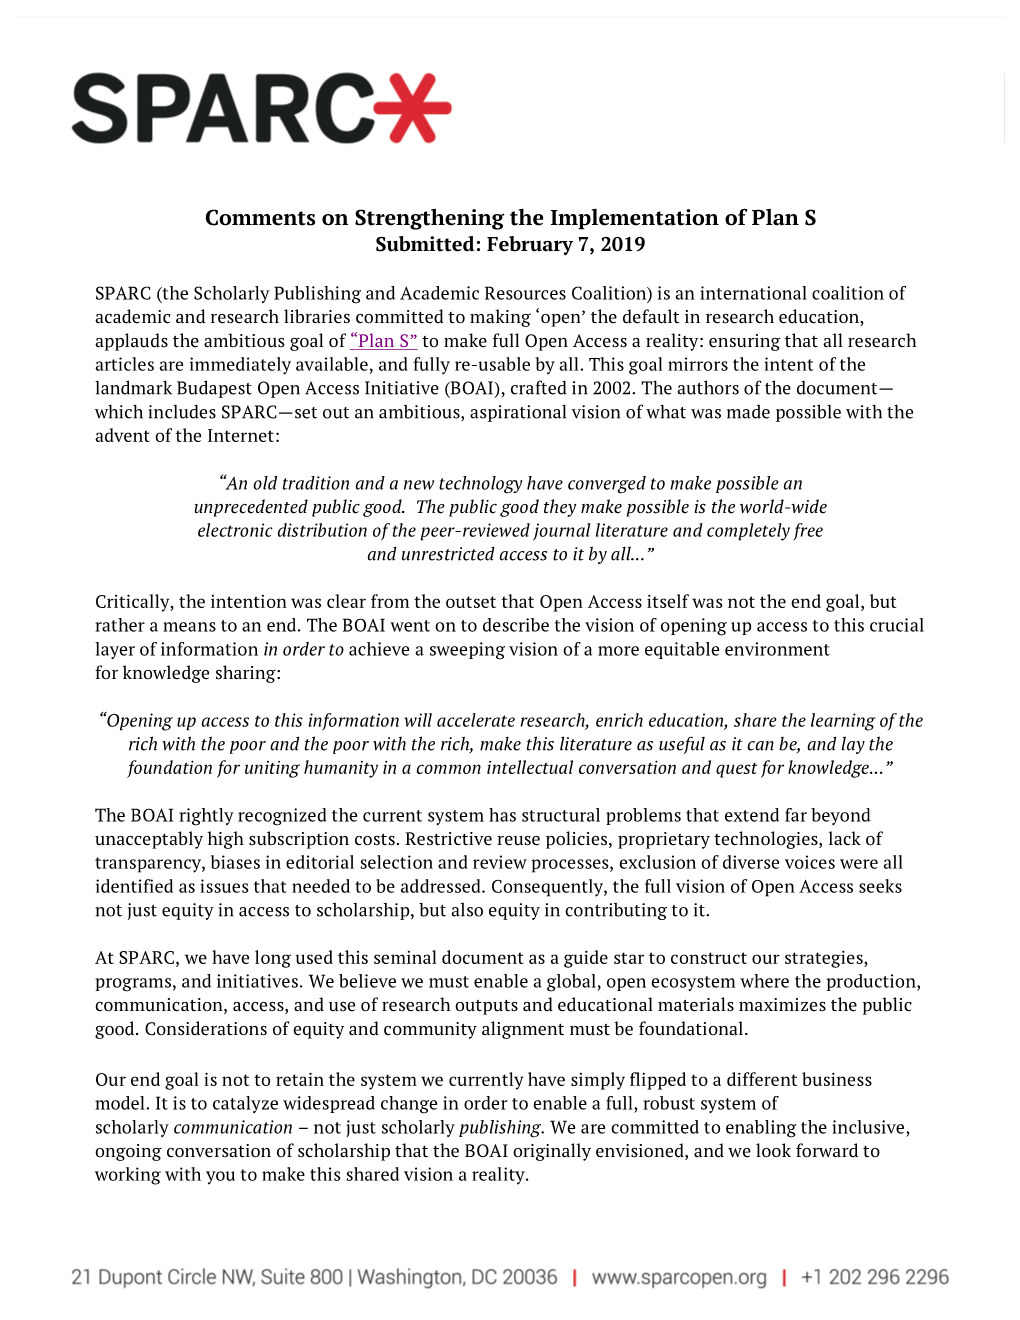 Comments on Strengthening the Implementation of Plan S Submitted: February 7, 2019